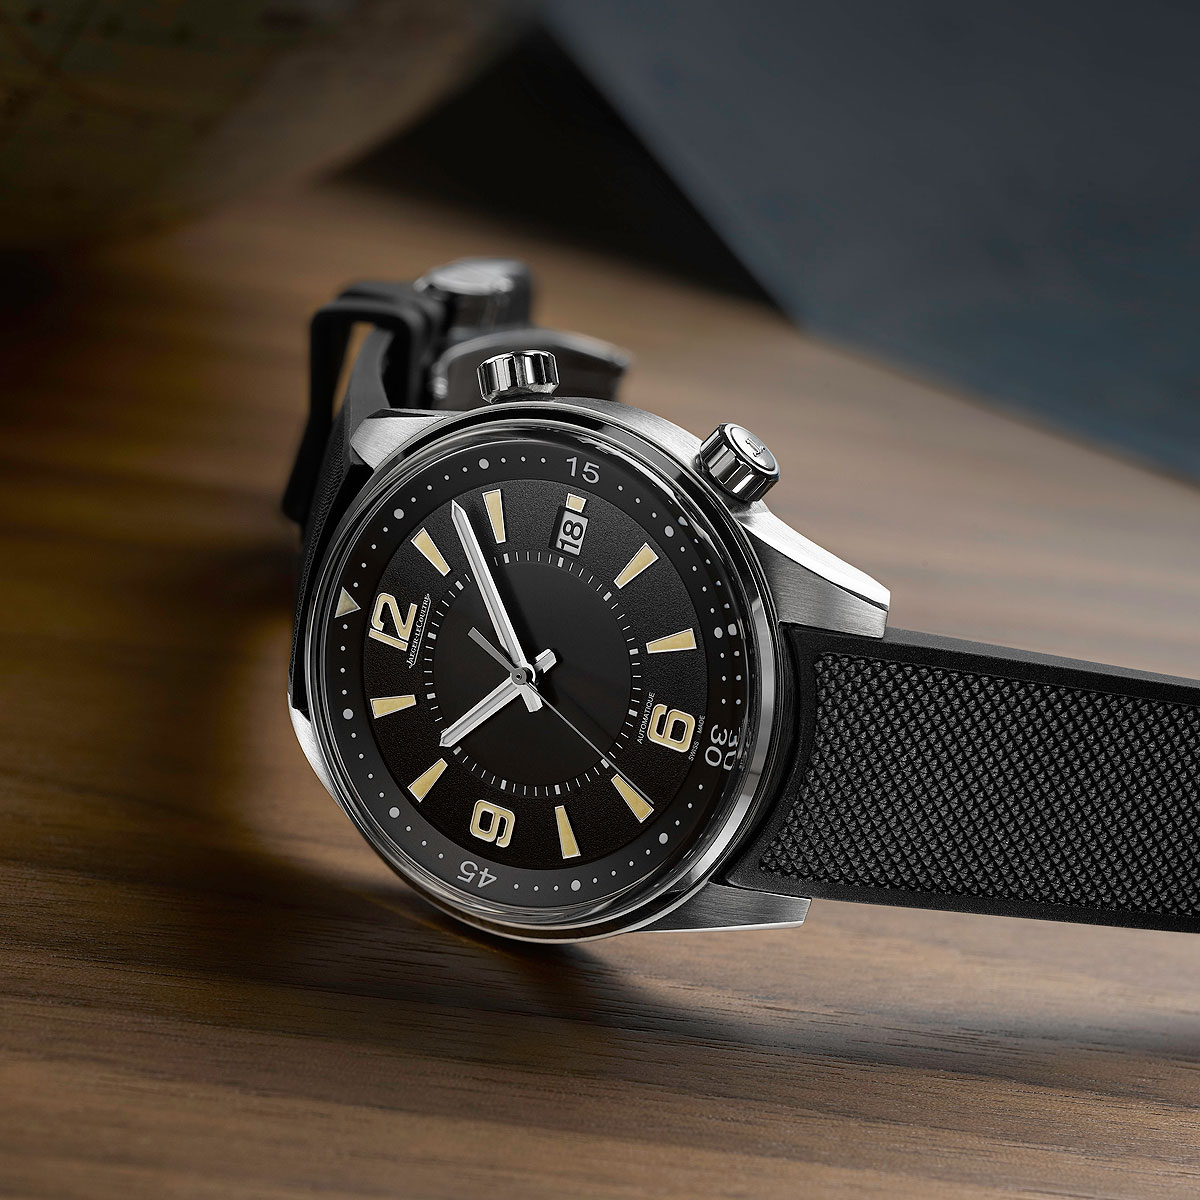 beproeving opleggen zeevruchten The New Jaeger-LeCoultre Polaris Collection Revives the Spirit of '68 |  WatchTime - USA's No.1 Watch Magazine